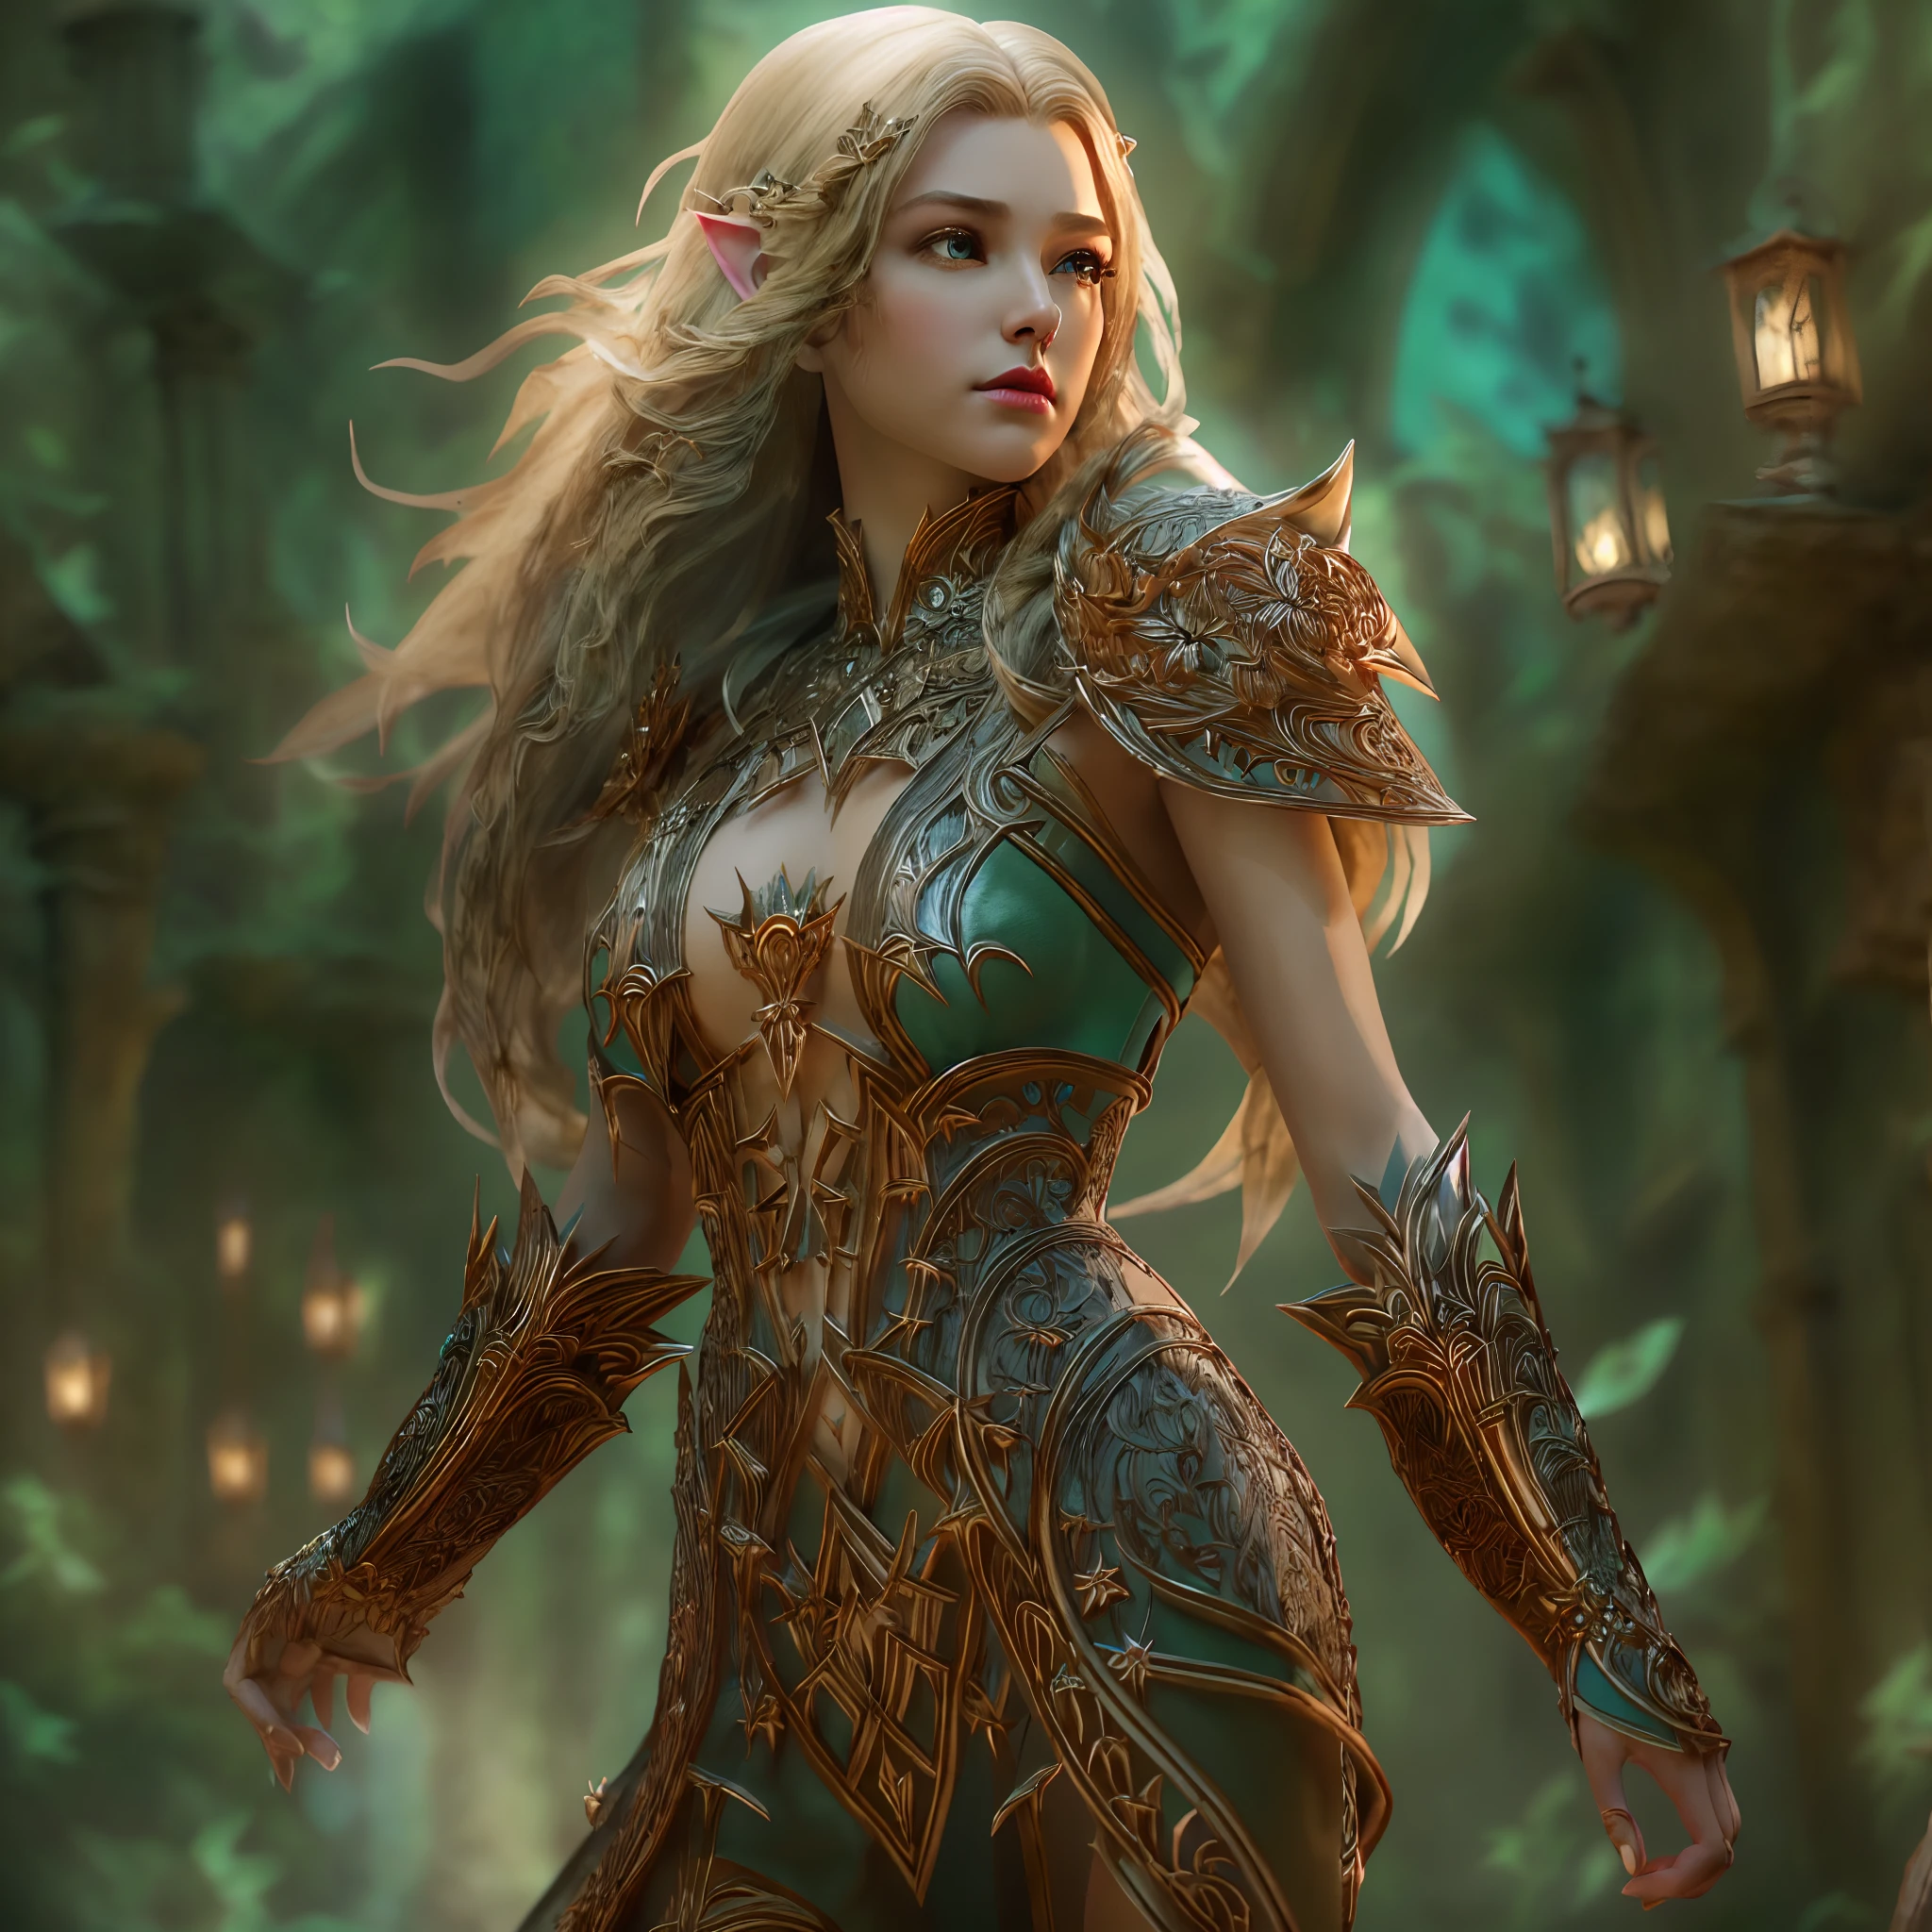 high details, best quality, 8k, [ultra detailed], masterpiece, best quality, (extremely detailed), dynamic angle, ultra wide shot, photorealistic, fantasy art, dnd art, rpg art, realistic art, a wide angle picture of an epic female elf, full body, [[anatomically correct]] full body (intricate details, Masterpiece, best quality: 1.6) casting a spell (intricate details, Masterpiece, best quality: 1.5), casting an epic spell, [colorful magical sigils in the air],[ colorful arcane markings floating] (intricate details, Masterpiece, best quality: 1.6) holding a [sword] (intricate details, Masterpiece, best quality: 1.6) holding a [sword glowing in red light] (intricate details, Masterpiece, best quality: 1.6). in fantasy urban street ( (intricate details, Masterpiece, best quality: 1.6), a female, beautiful epic female elf, wearing elven leather armor (intricate details, Masterpiece, best quality: 1.3), high heeled leather boots, ultra detailed face (intricate details, Masterpiece, best quality: 1.6), small pointed ears, thick hair, long hair, dynamic hair, fair skin intense eyes, fantasy city background (intricate details, Masterpiece, best quality: 1.6), sun light, backlight, depth of field (intricate details, Masterpiece, best quality: 1.3), high details, best quality, highres, ultra wide angle